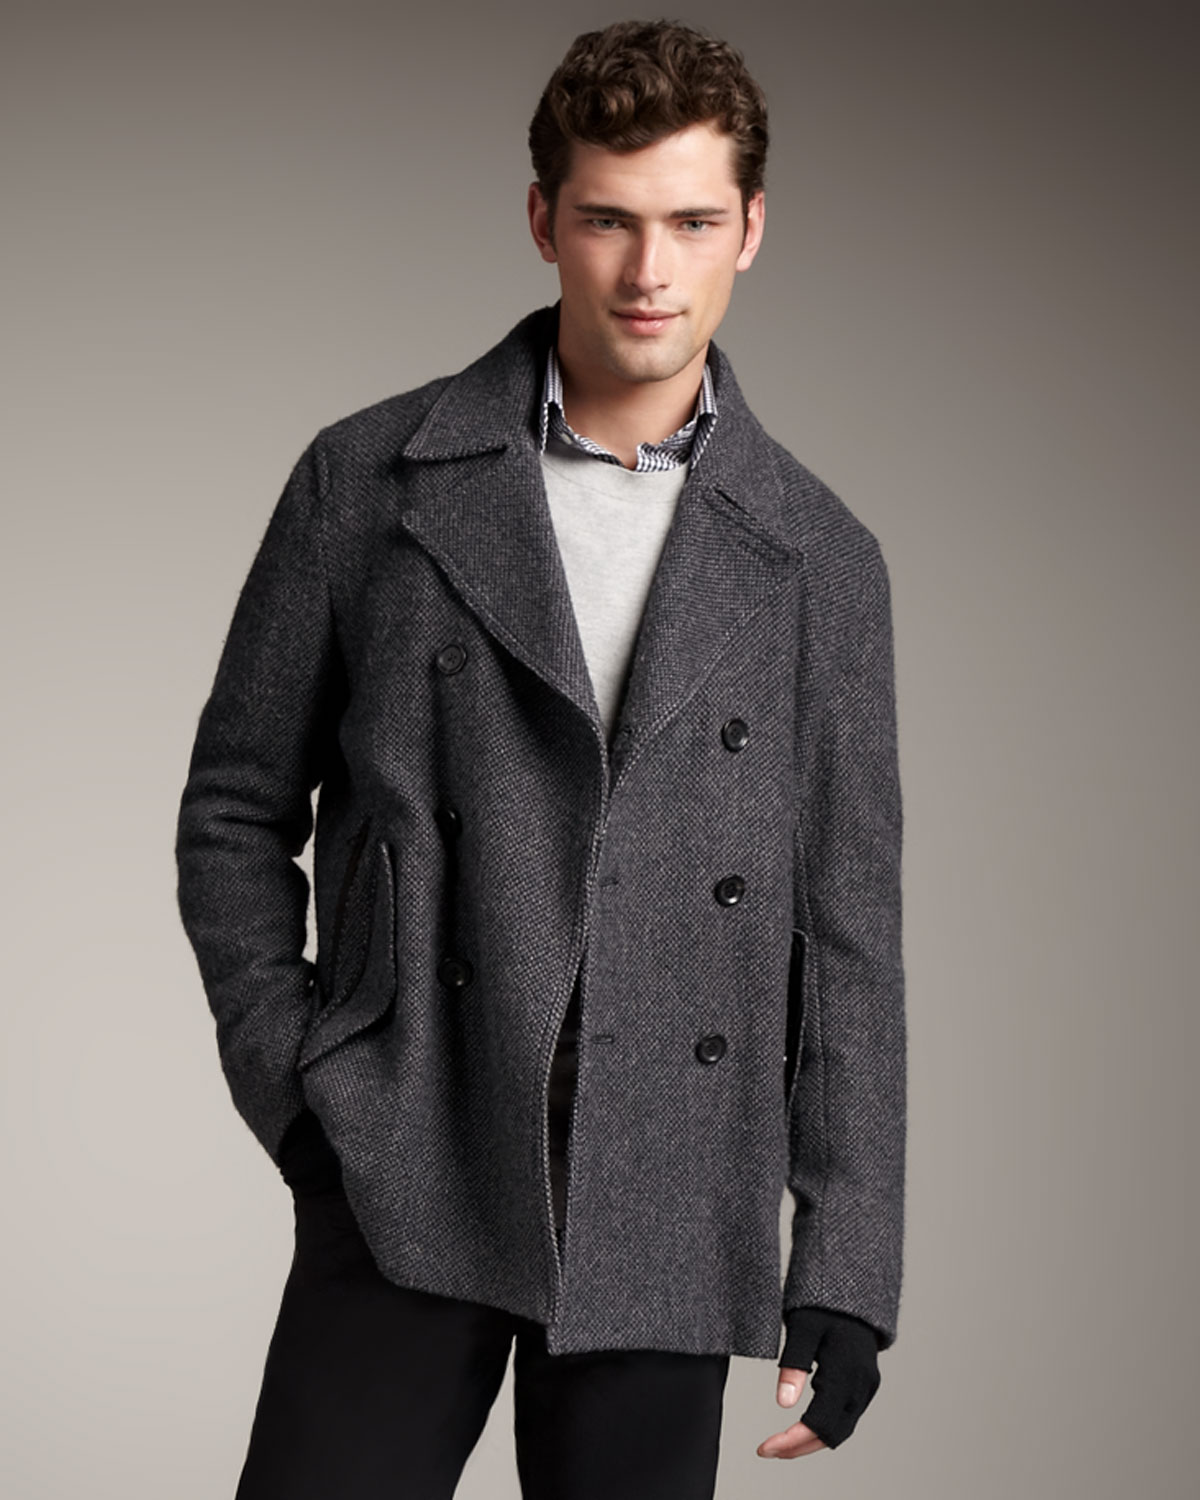 Lyst - Theory Wool Pea Coat in Gray for Men